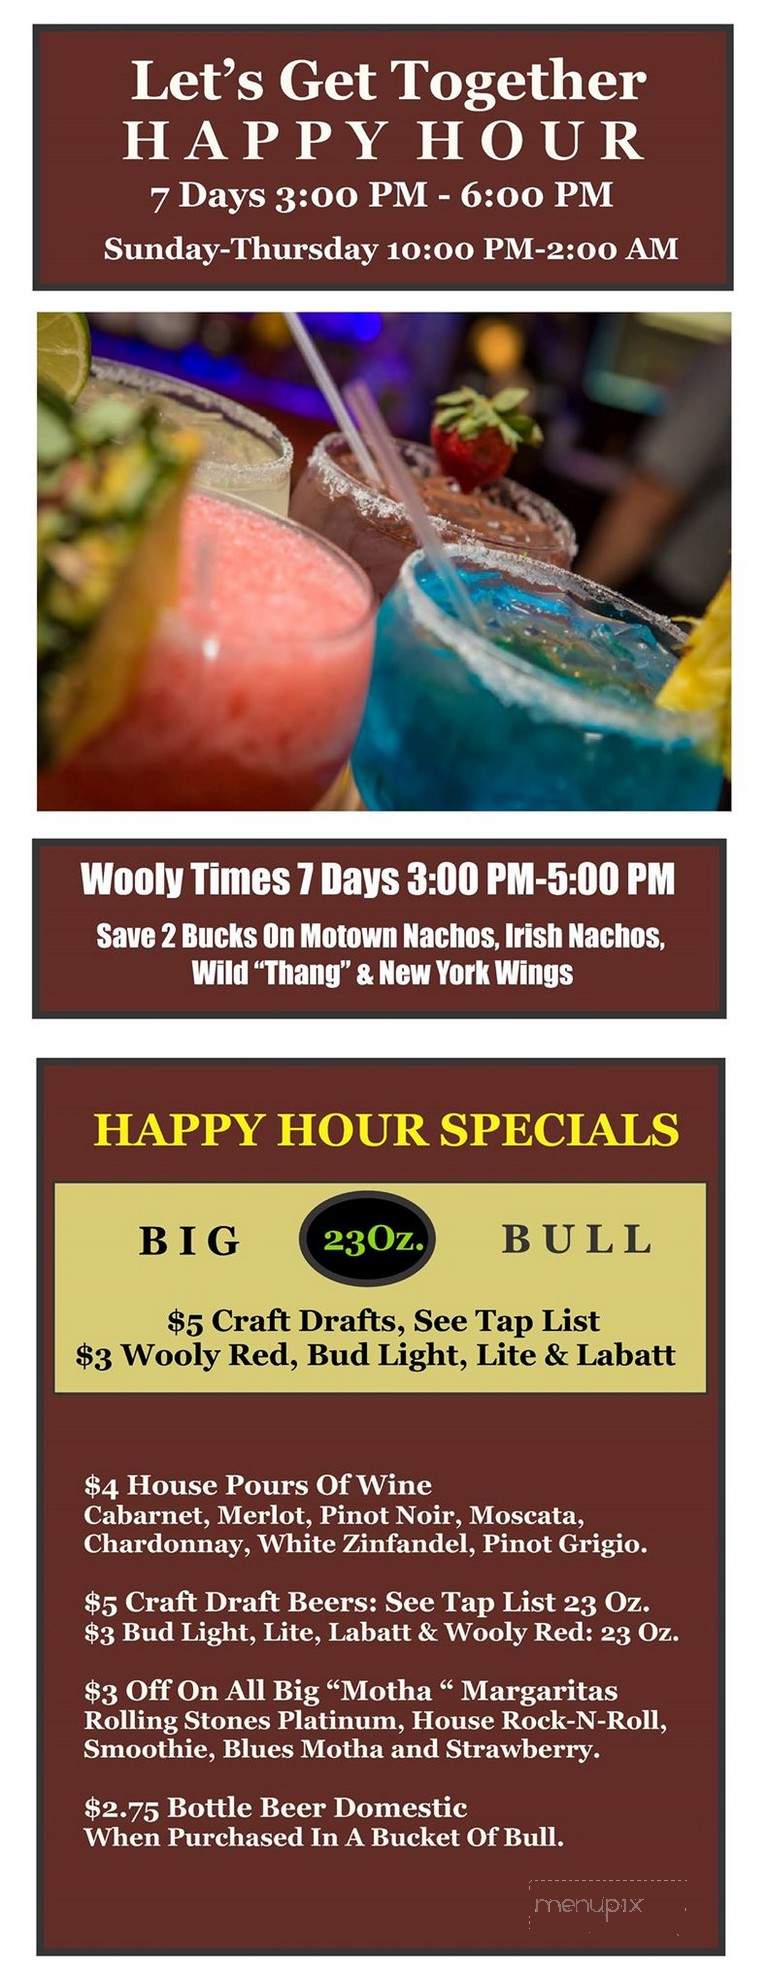 Wooly Bully's - Howell, MI